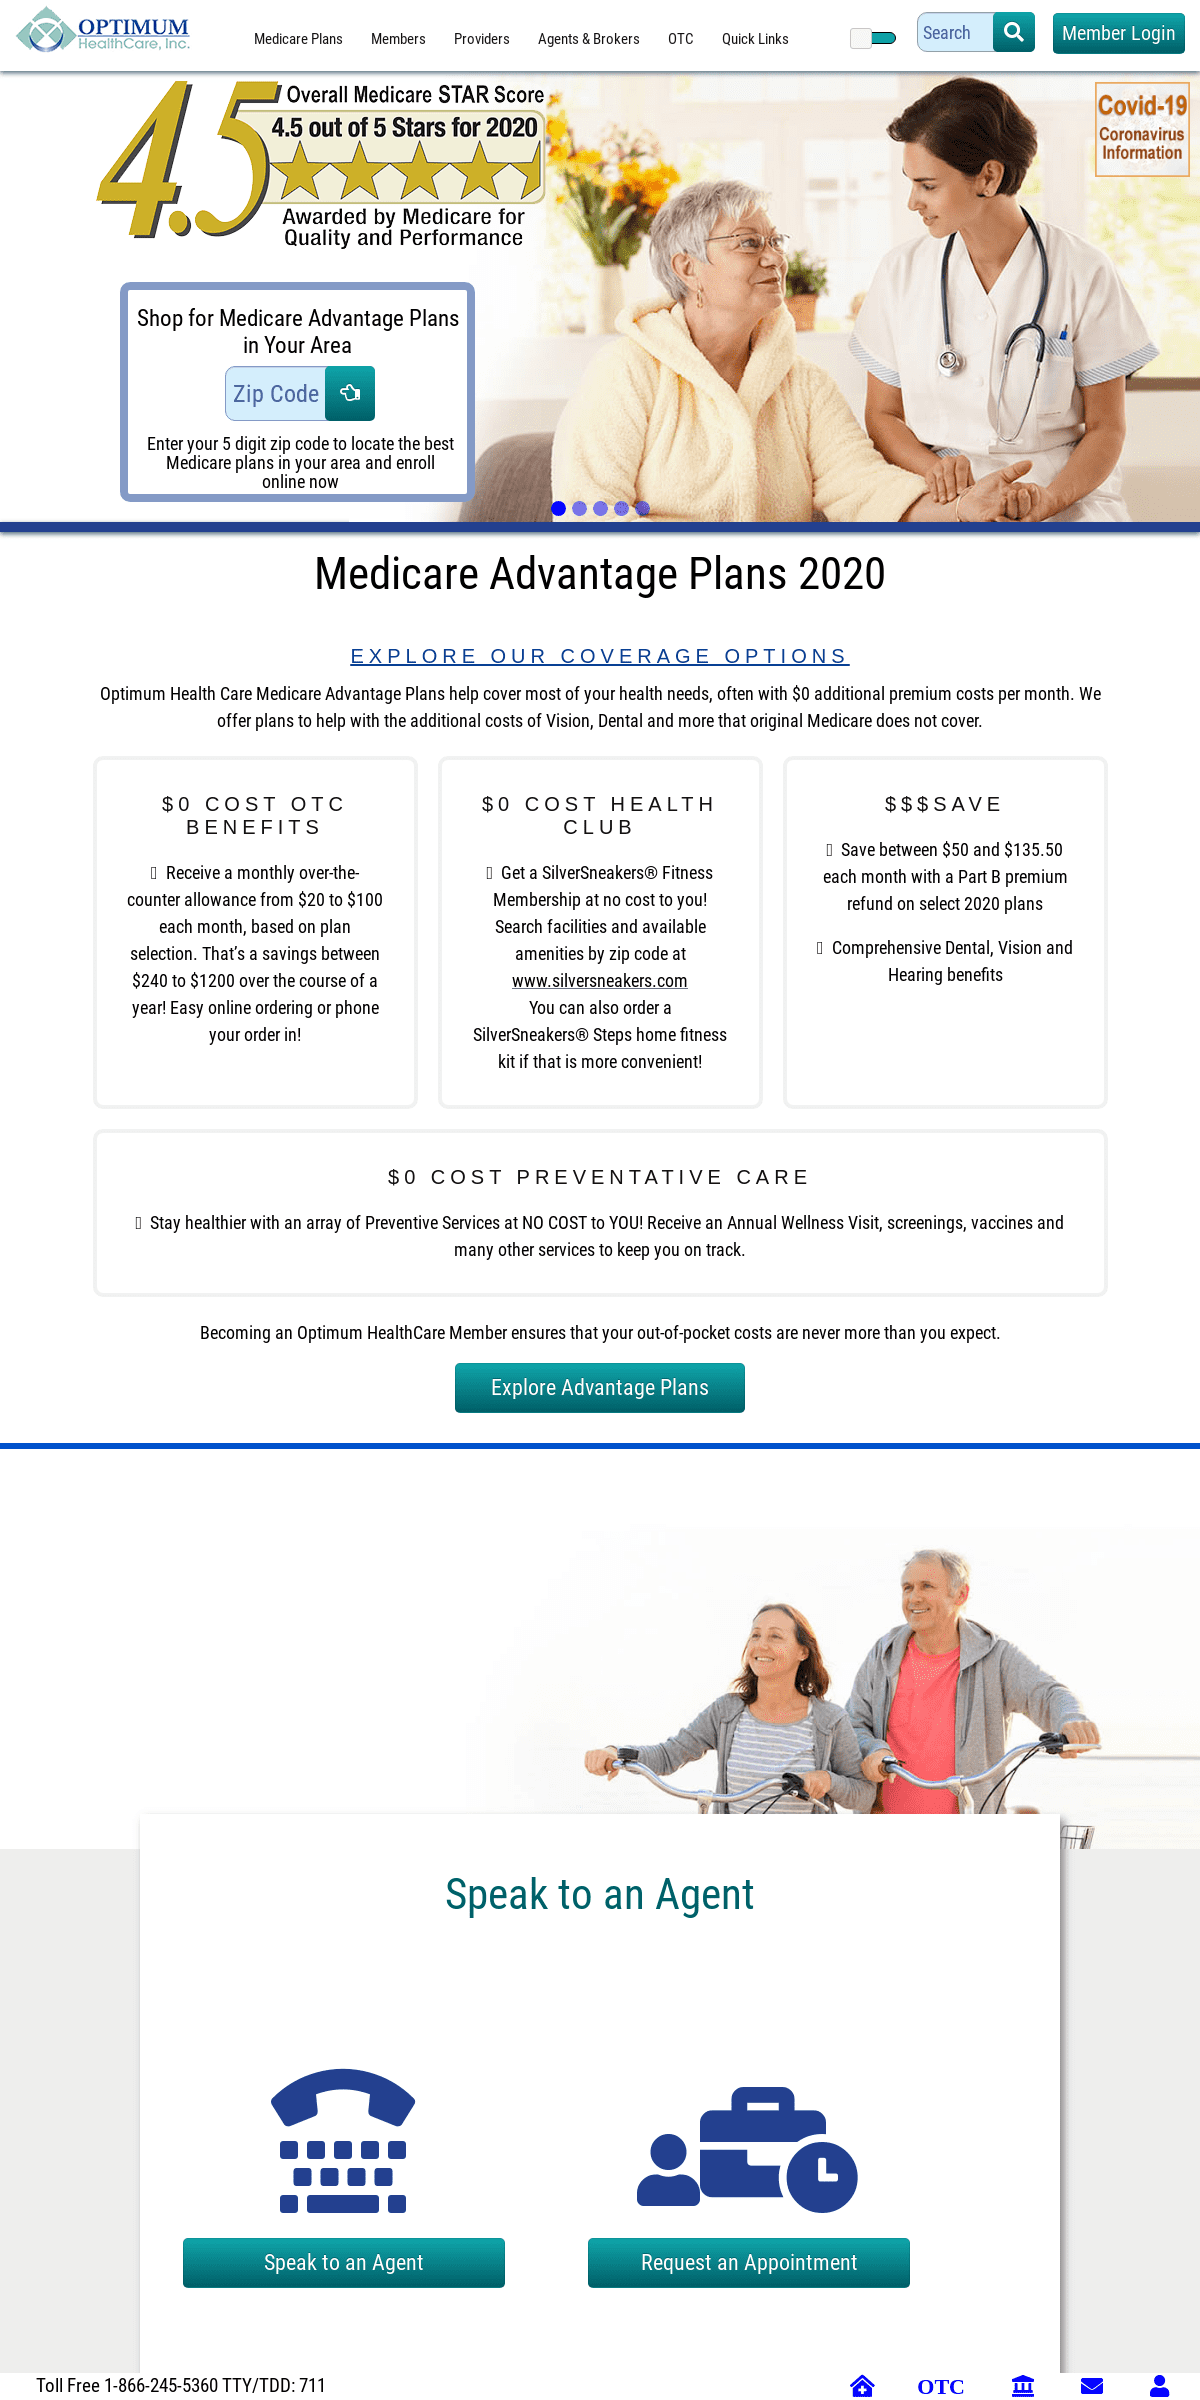 A complete backup of youroptimumhealthcare.com